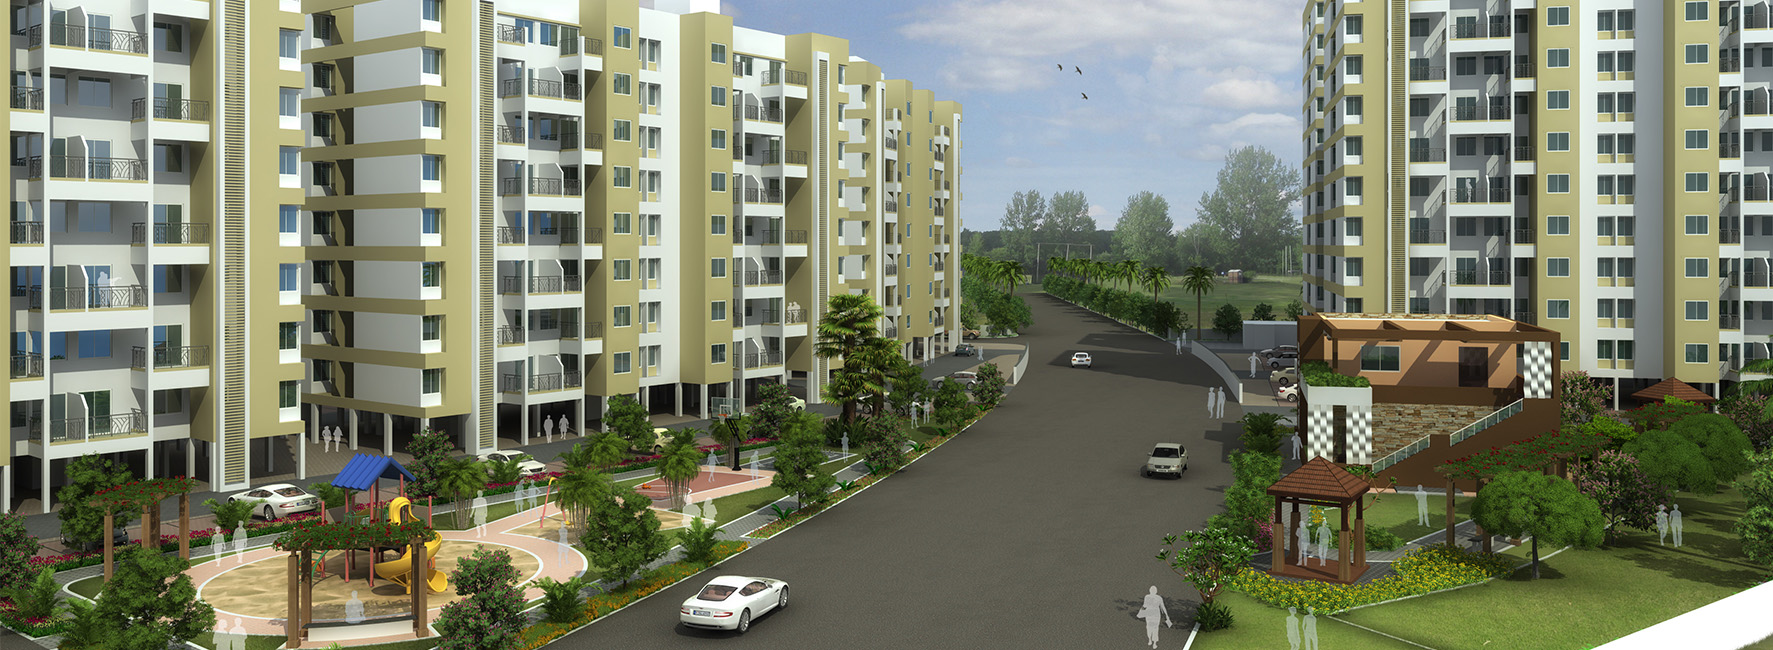 Maple Group, 1BHK HOMES FOR IN AMBEGAON, UNDERCONSTRUCTION HOMES IN AMBEGAON, TOP 10 PROJECTS IN AMBEGAON AAPLA GHAR, LOW BUDGET FLATS IN AMBEGAON, 2BHK RESIDENTIAL FLATS IN AMBEGAON.